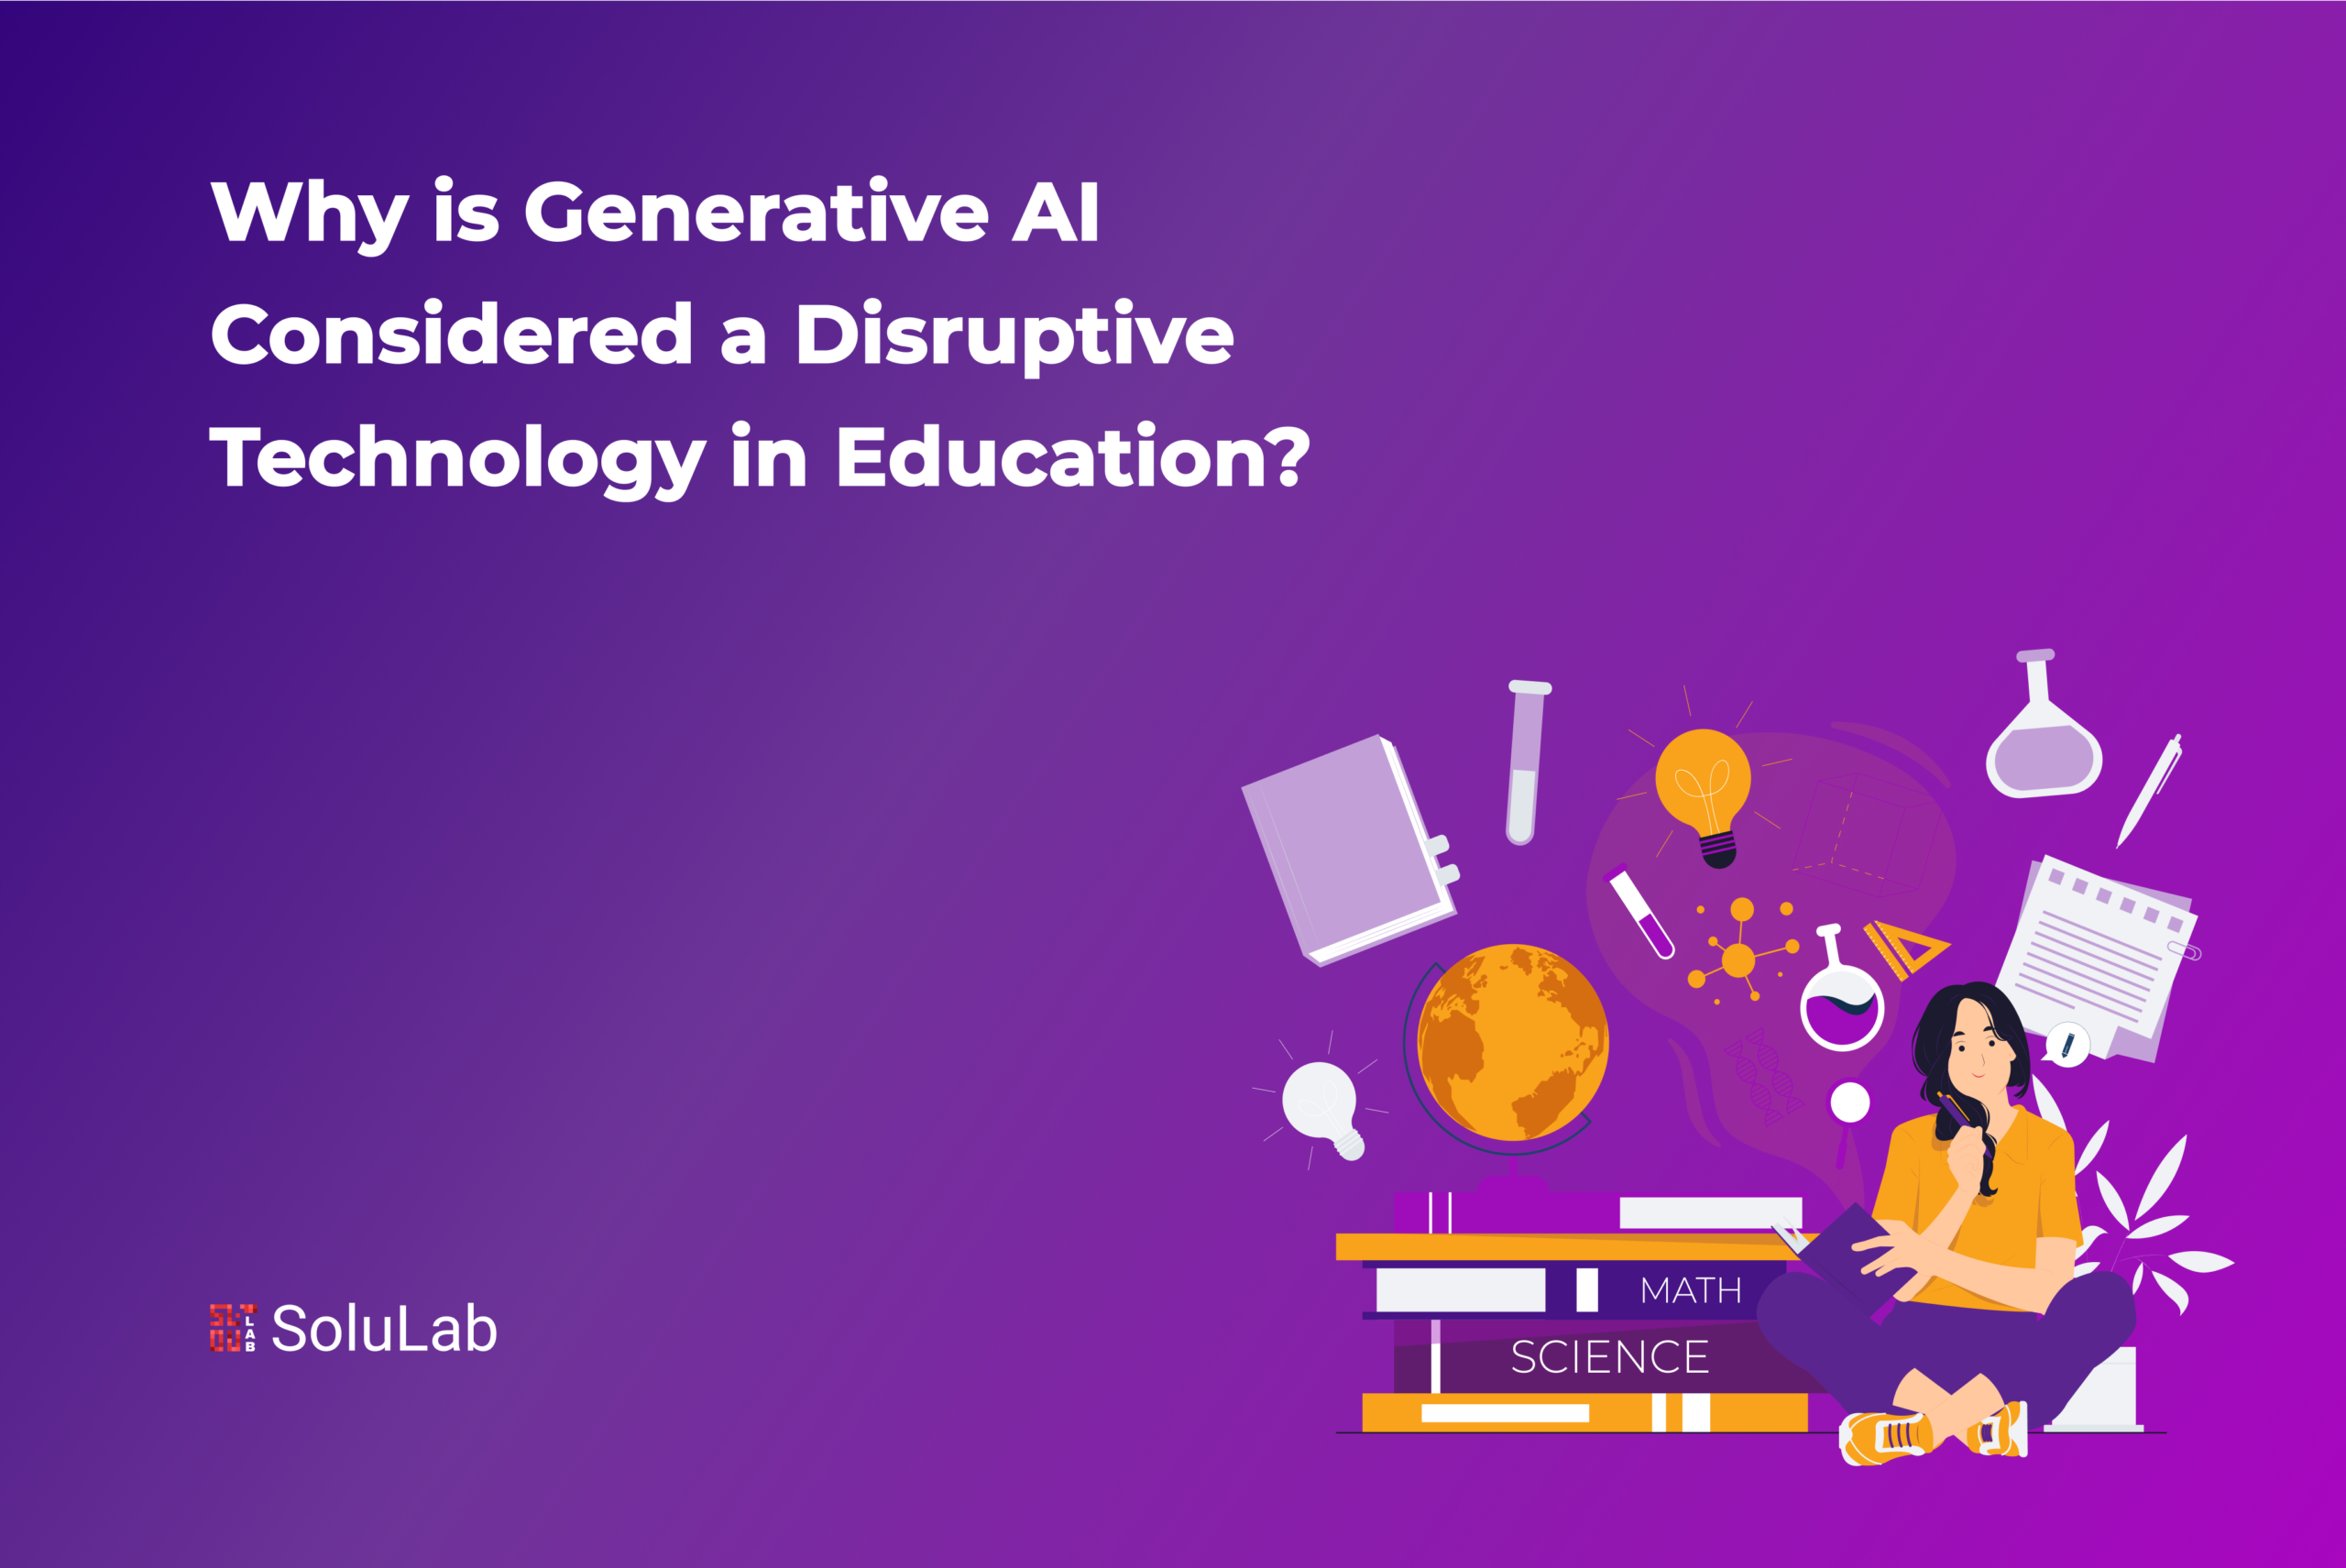 Why is Generative AI Considered a Disruptive Technology in Education?